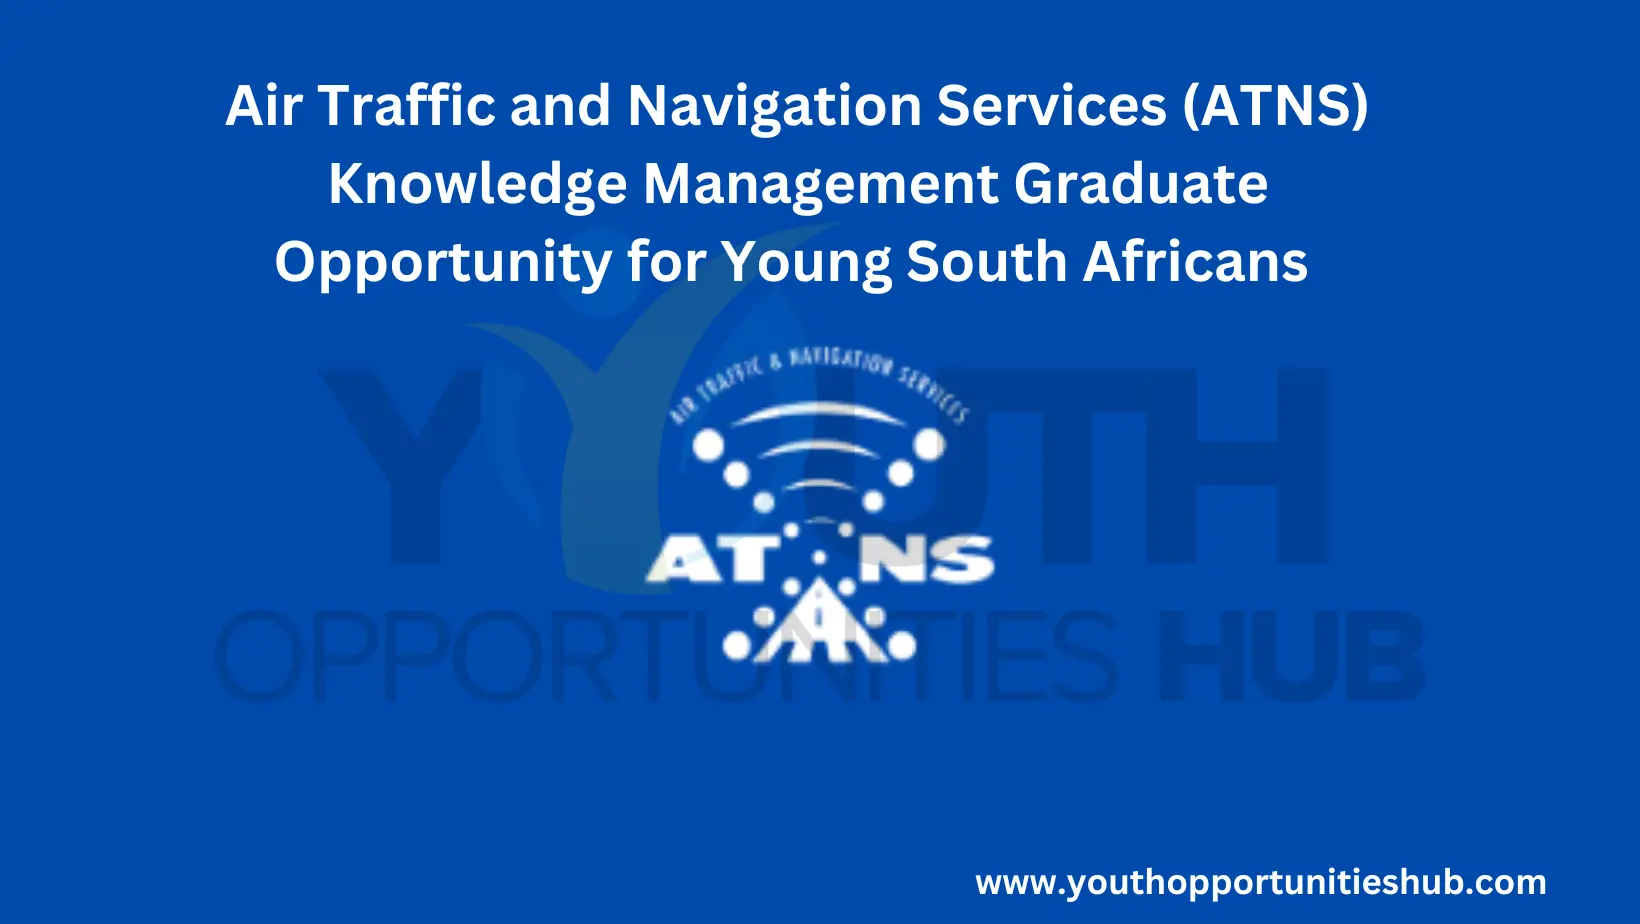 Air Traffic and Navigation Services (ATNS): Graduate-in-Training / Internships